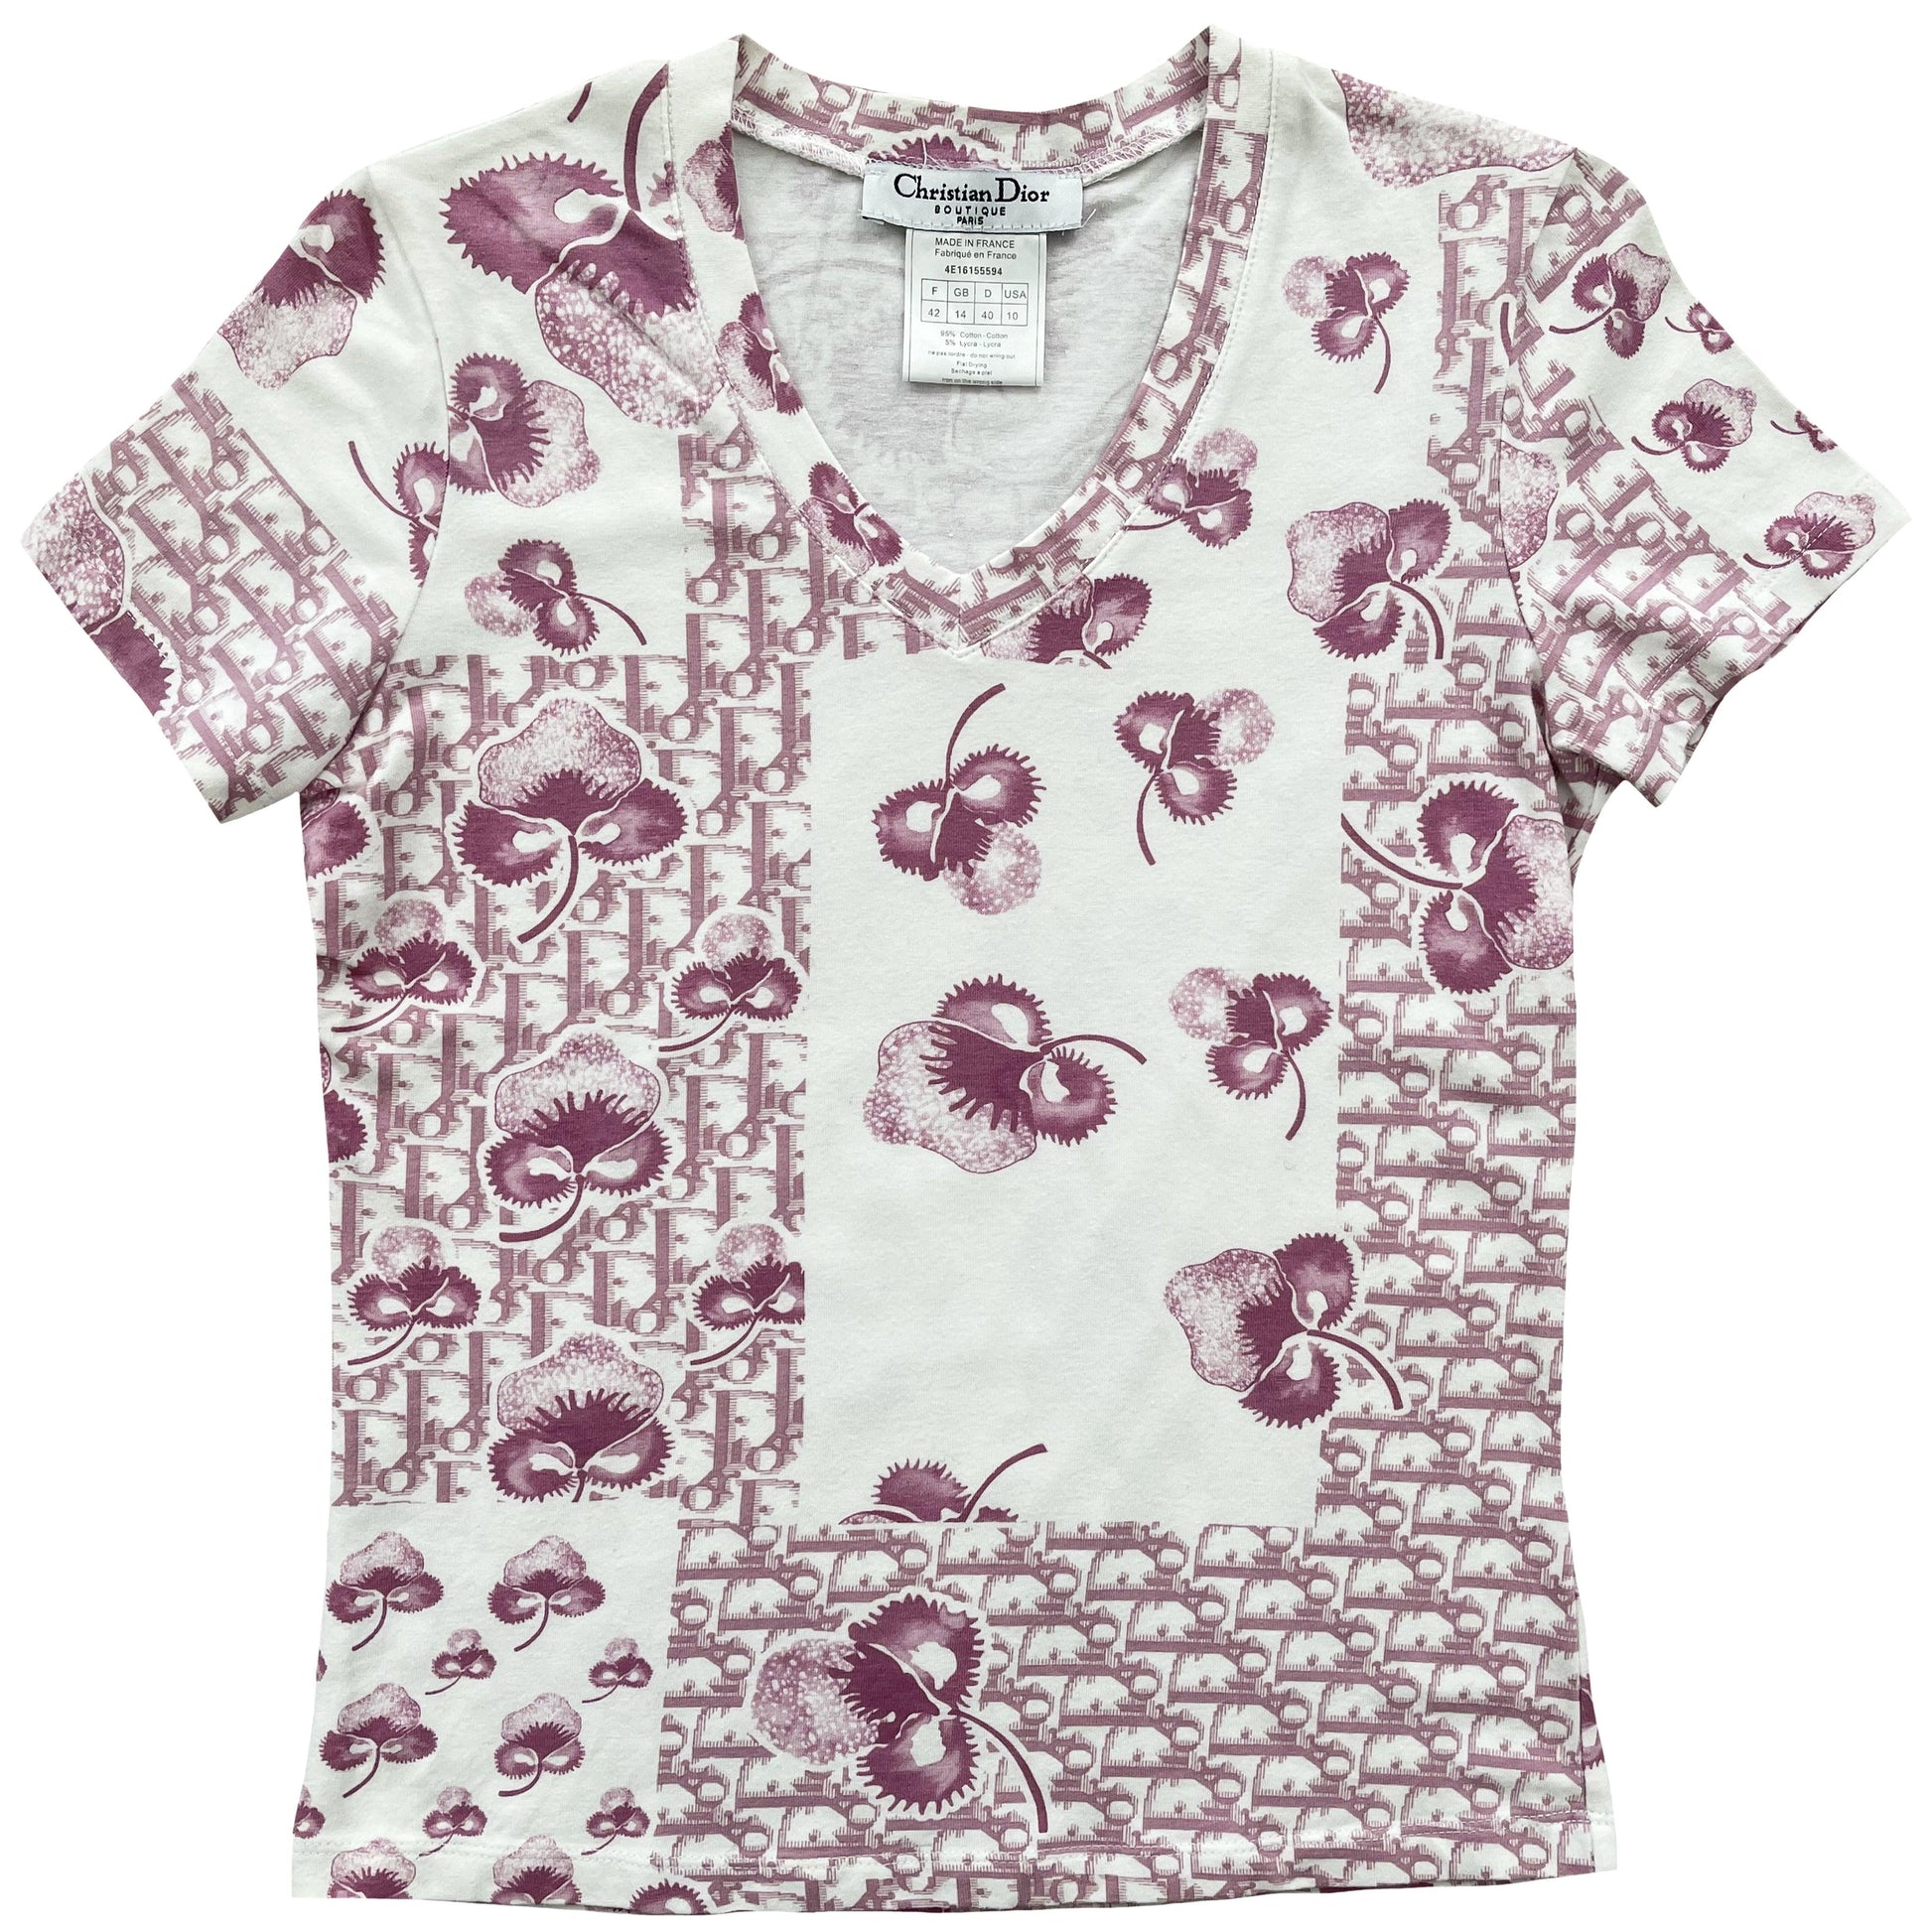 Christian Dior Cherry Blossom T-Shirt - Known Source